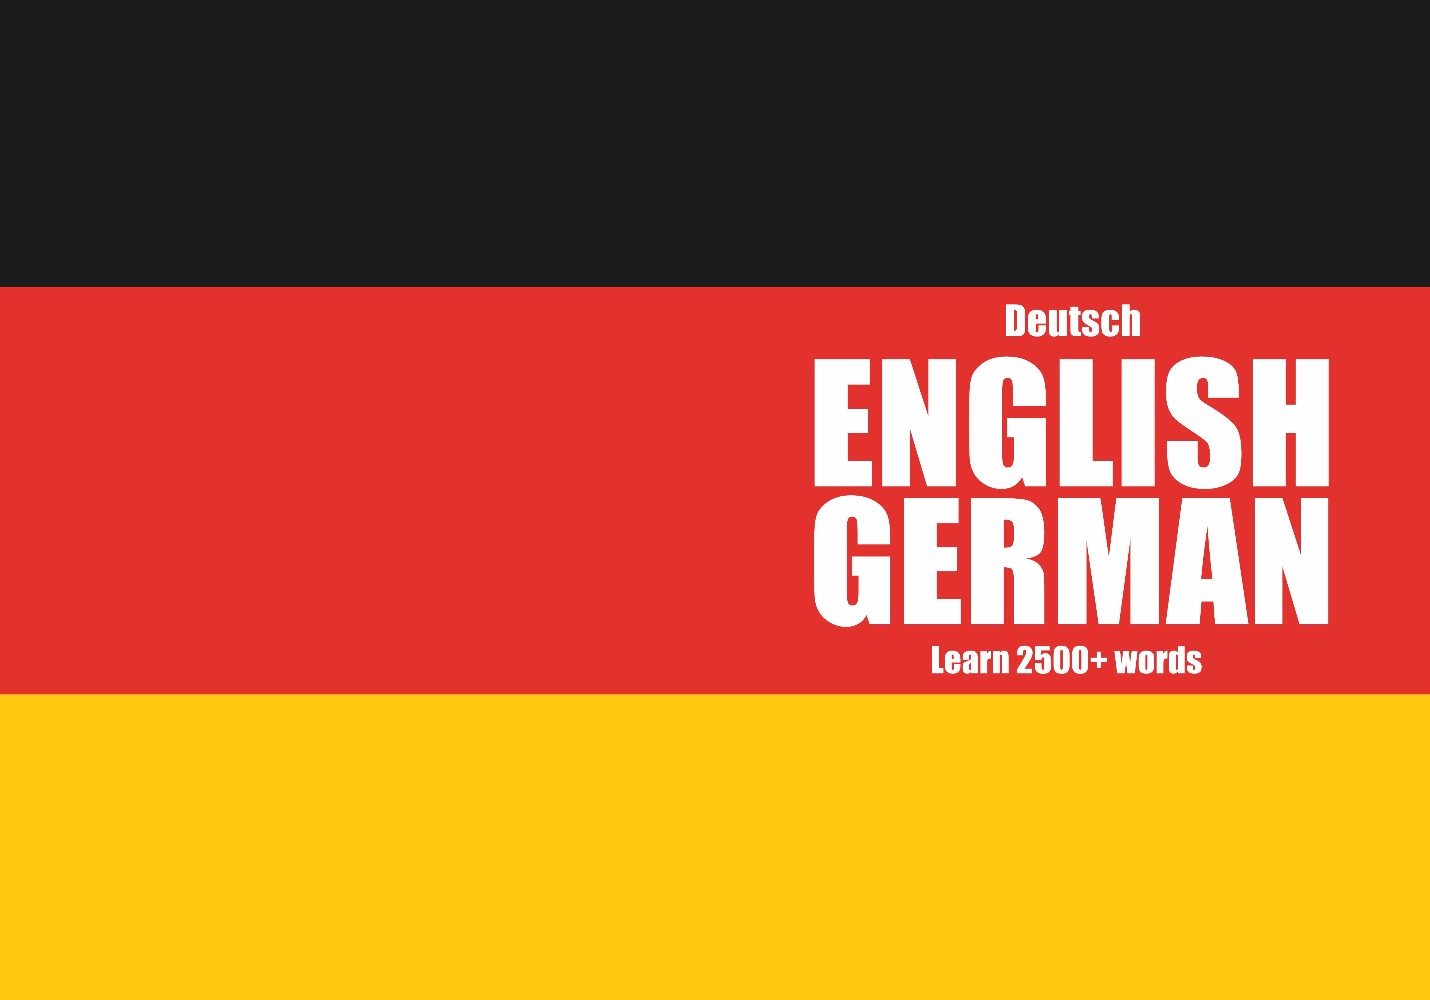 German language learning notebook cover